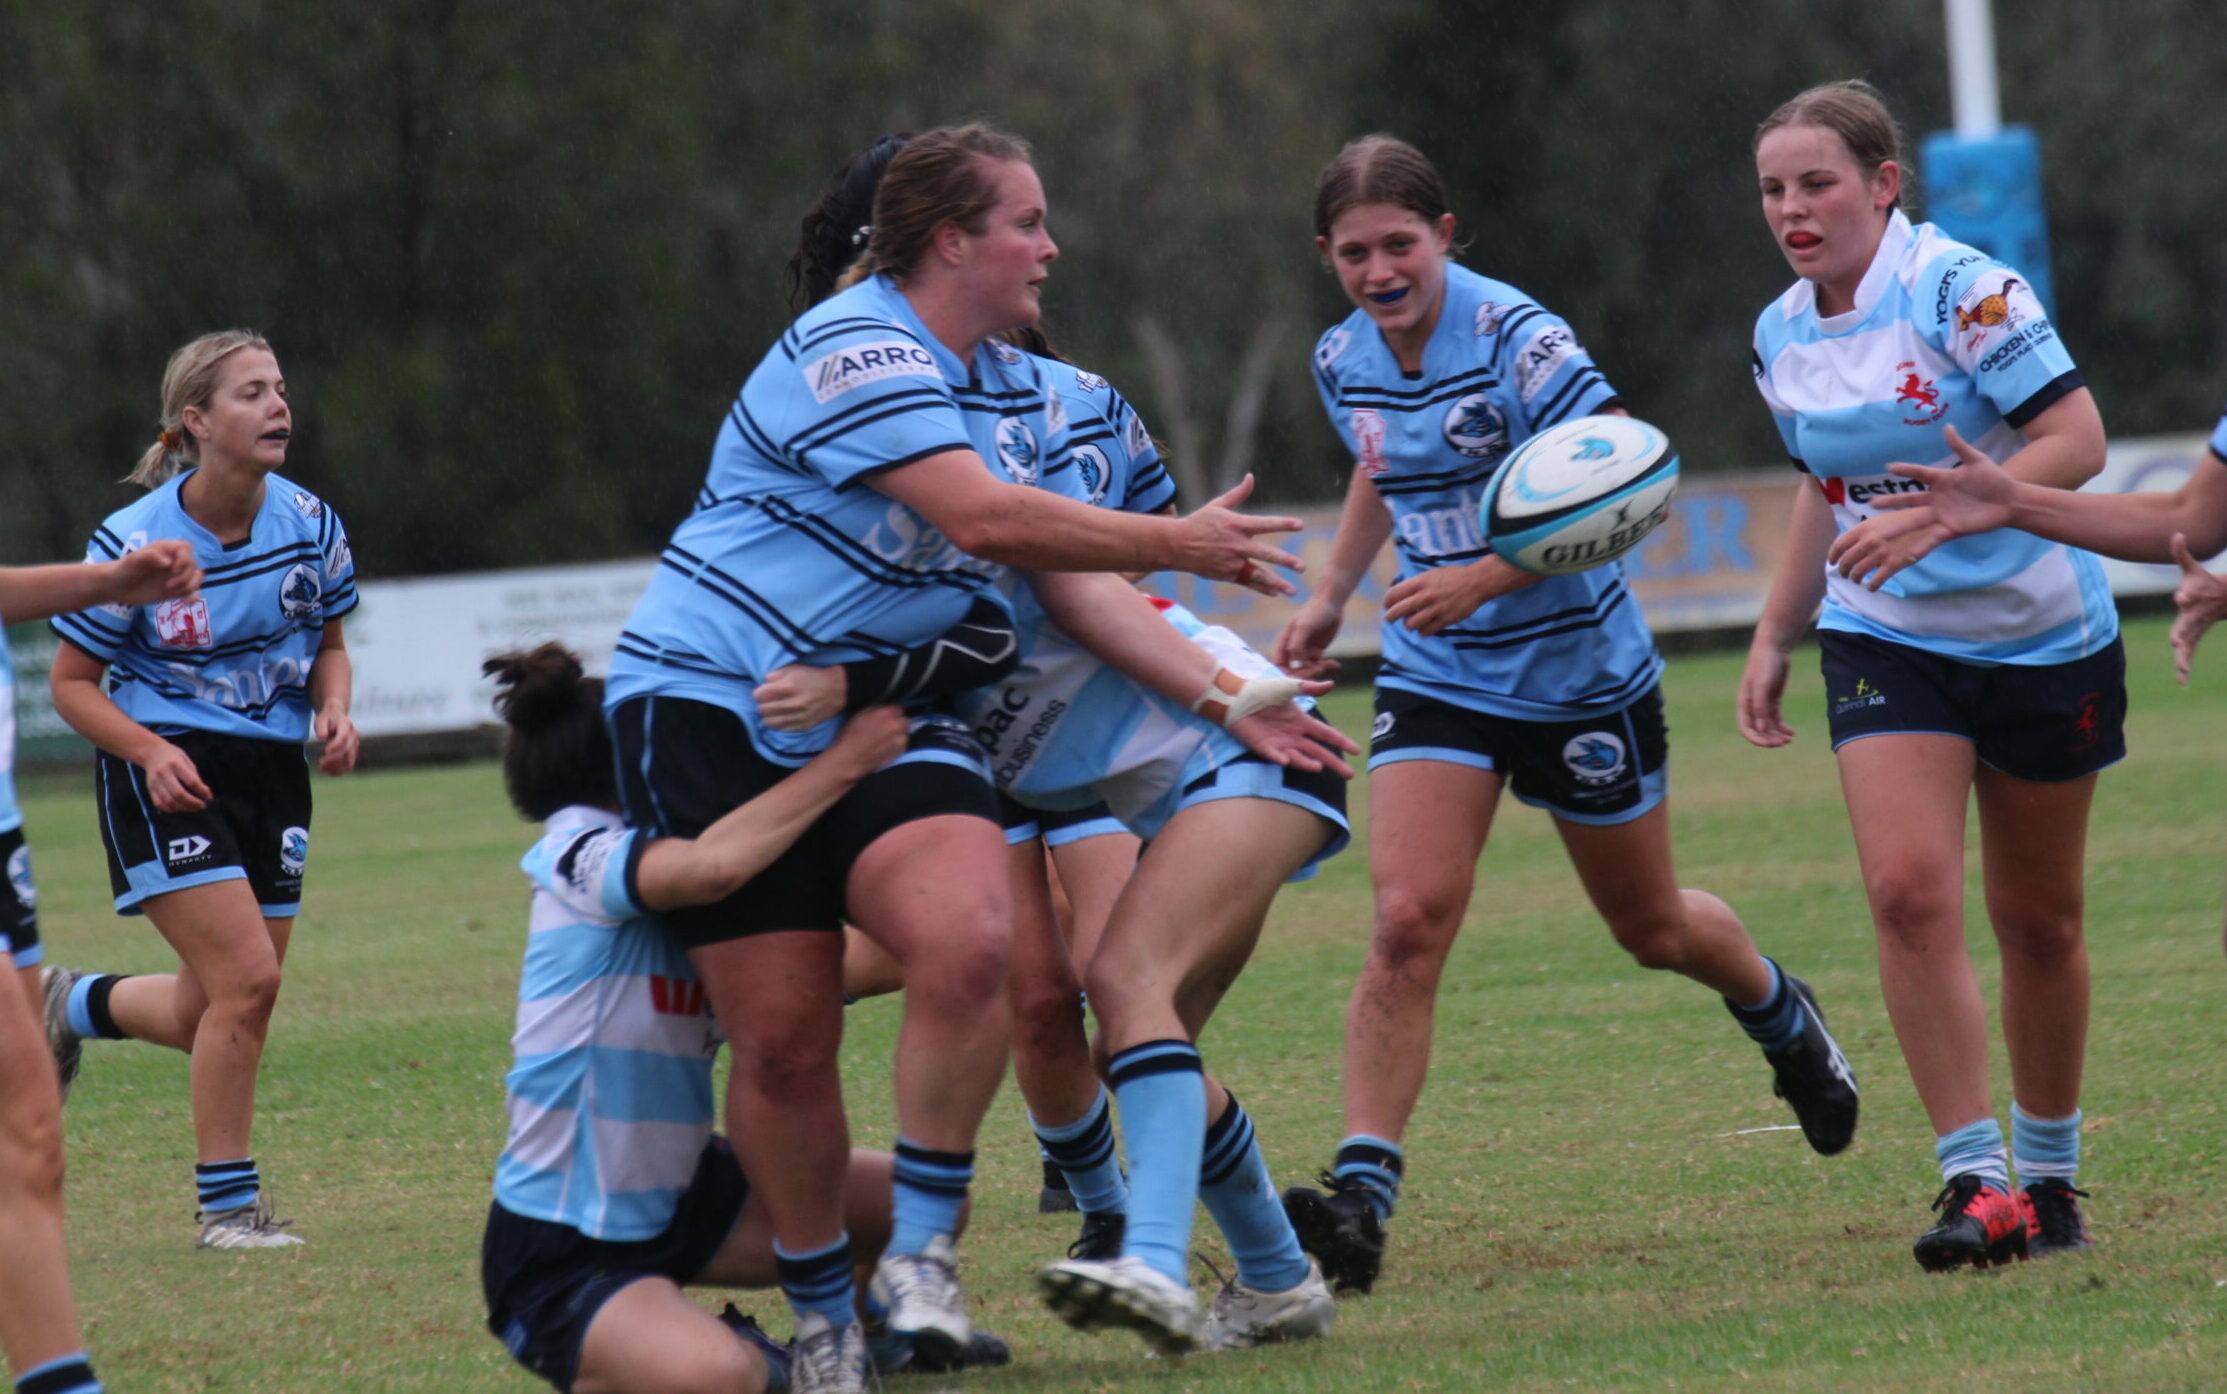 Narrabri Rugby Club’s women’s 10s team to meet Pirates in top-of-the-table clash on Saturday